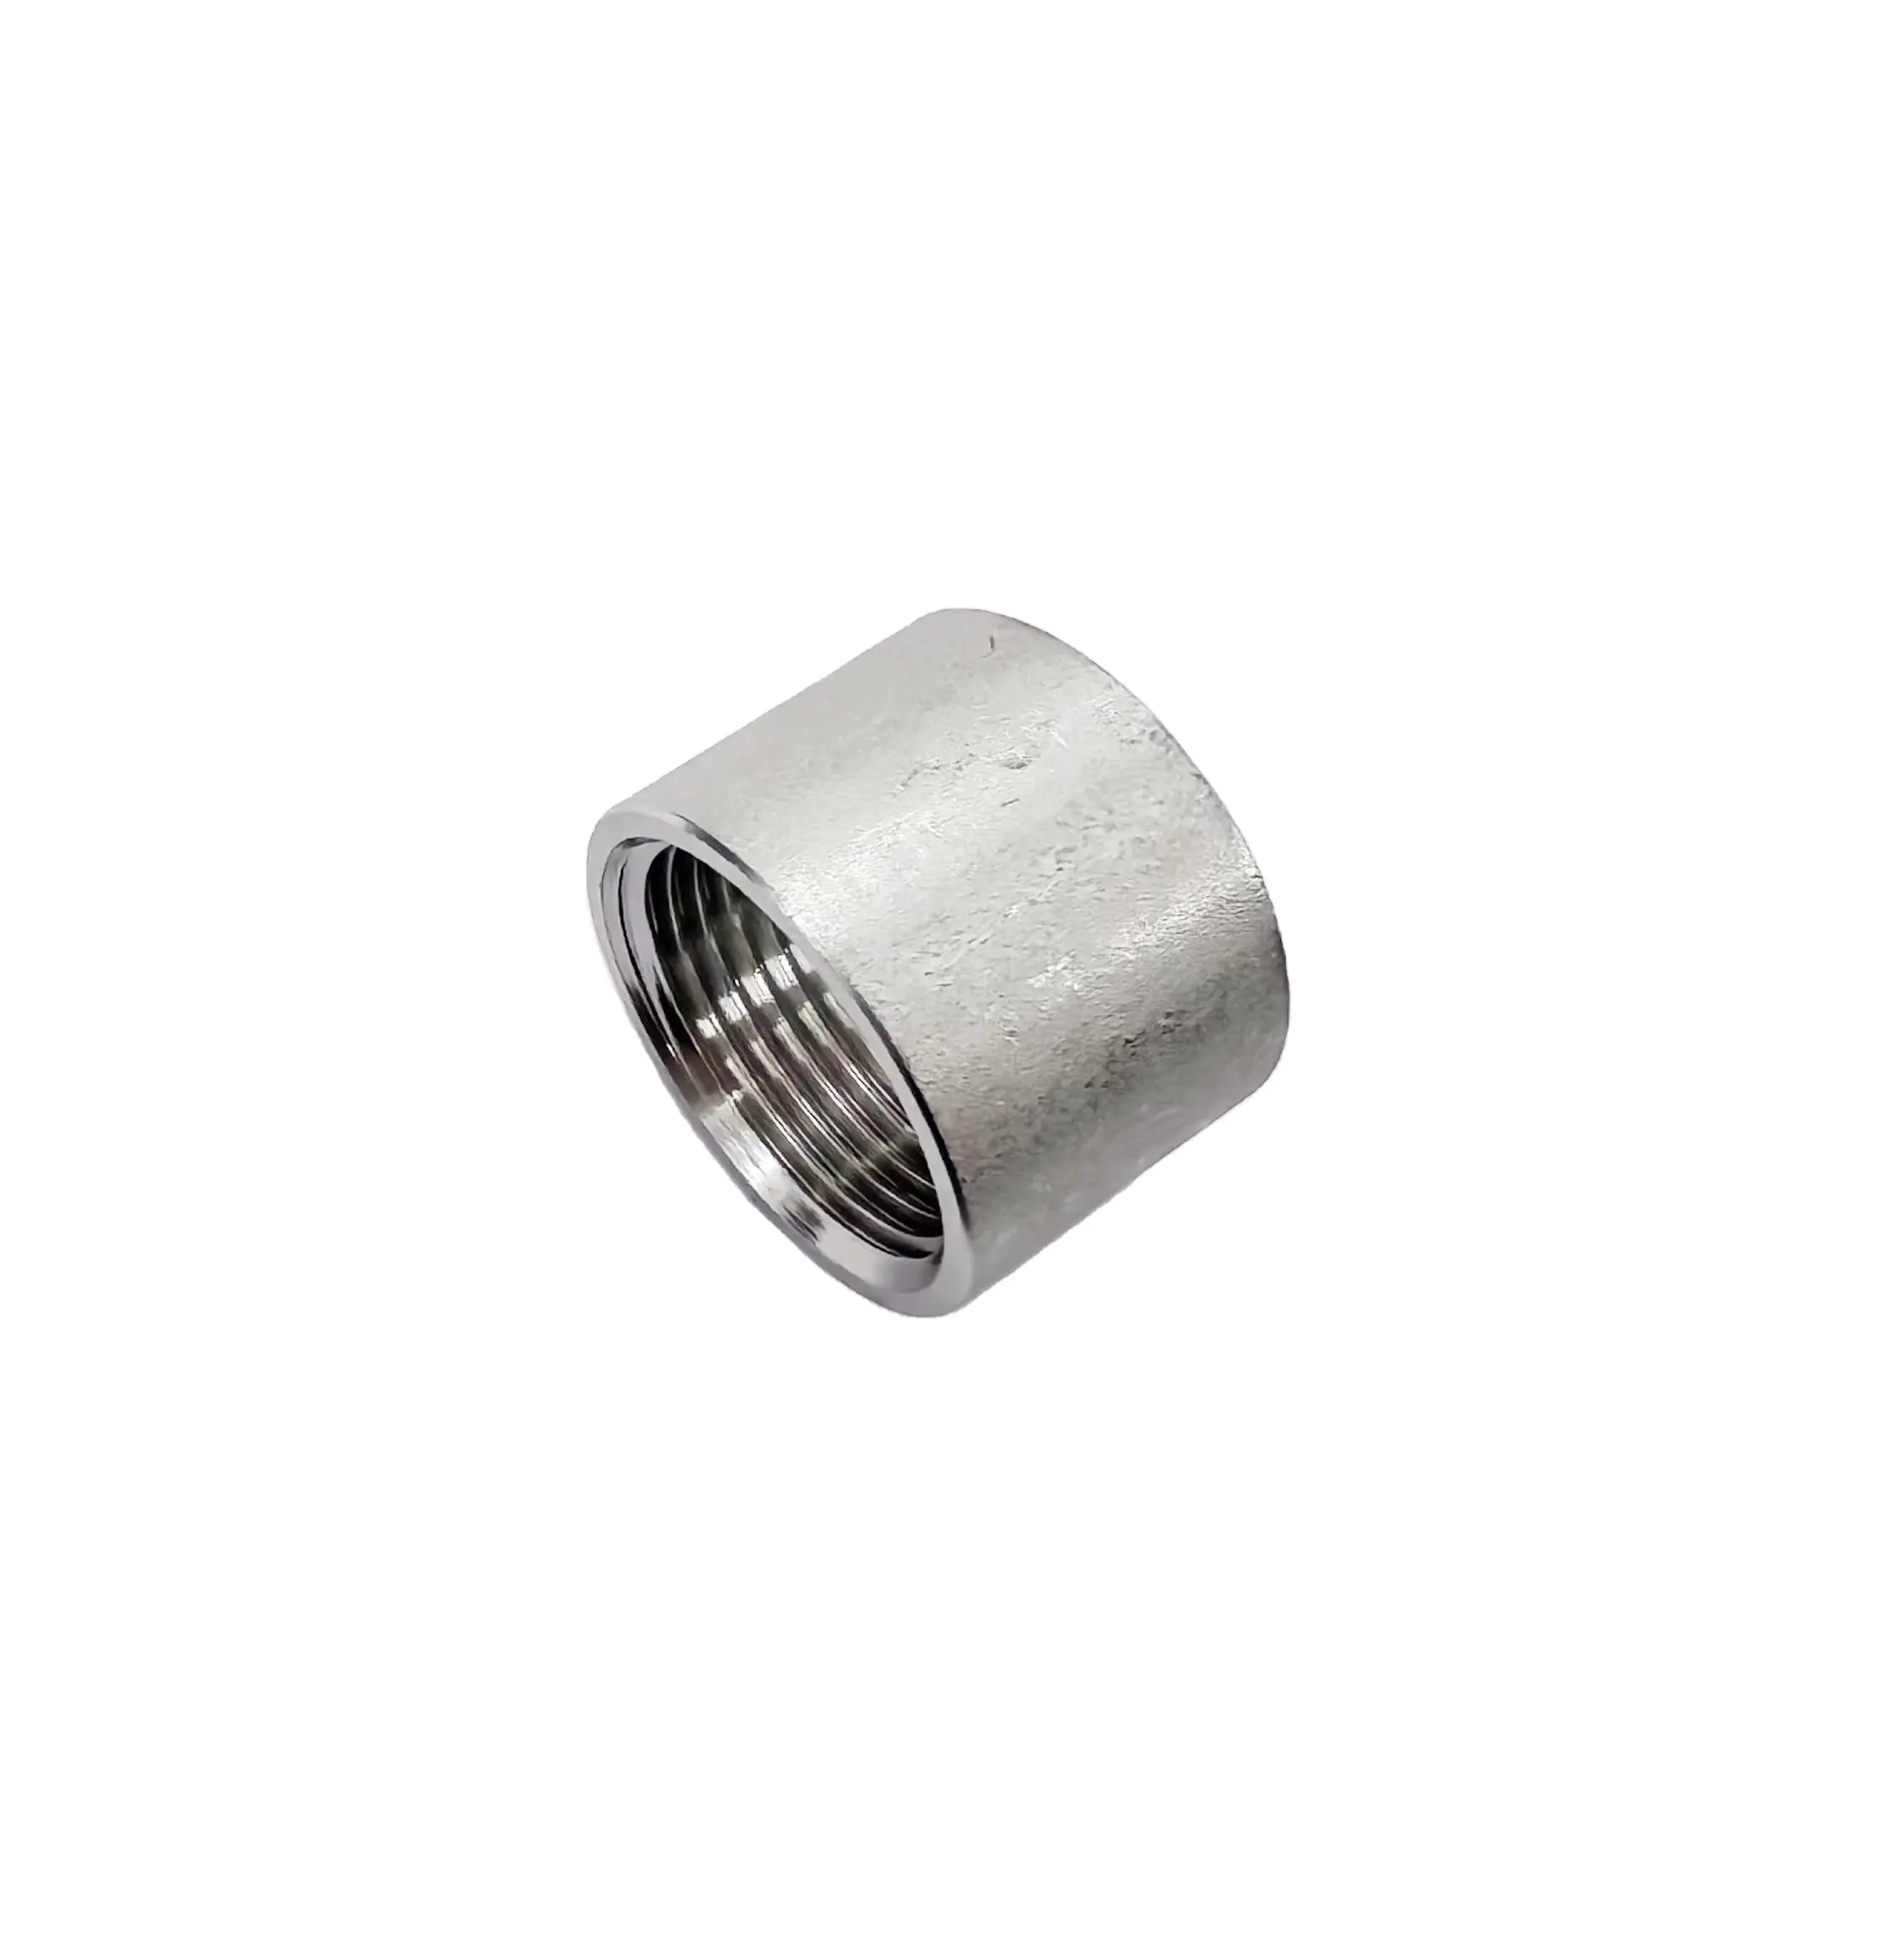 304 Stainless Steel Half Socket Application for Oil with BSP Standard Casting Technics BSPT Thread